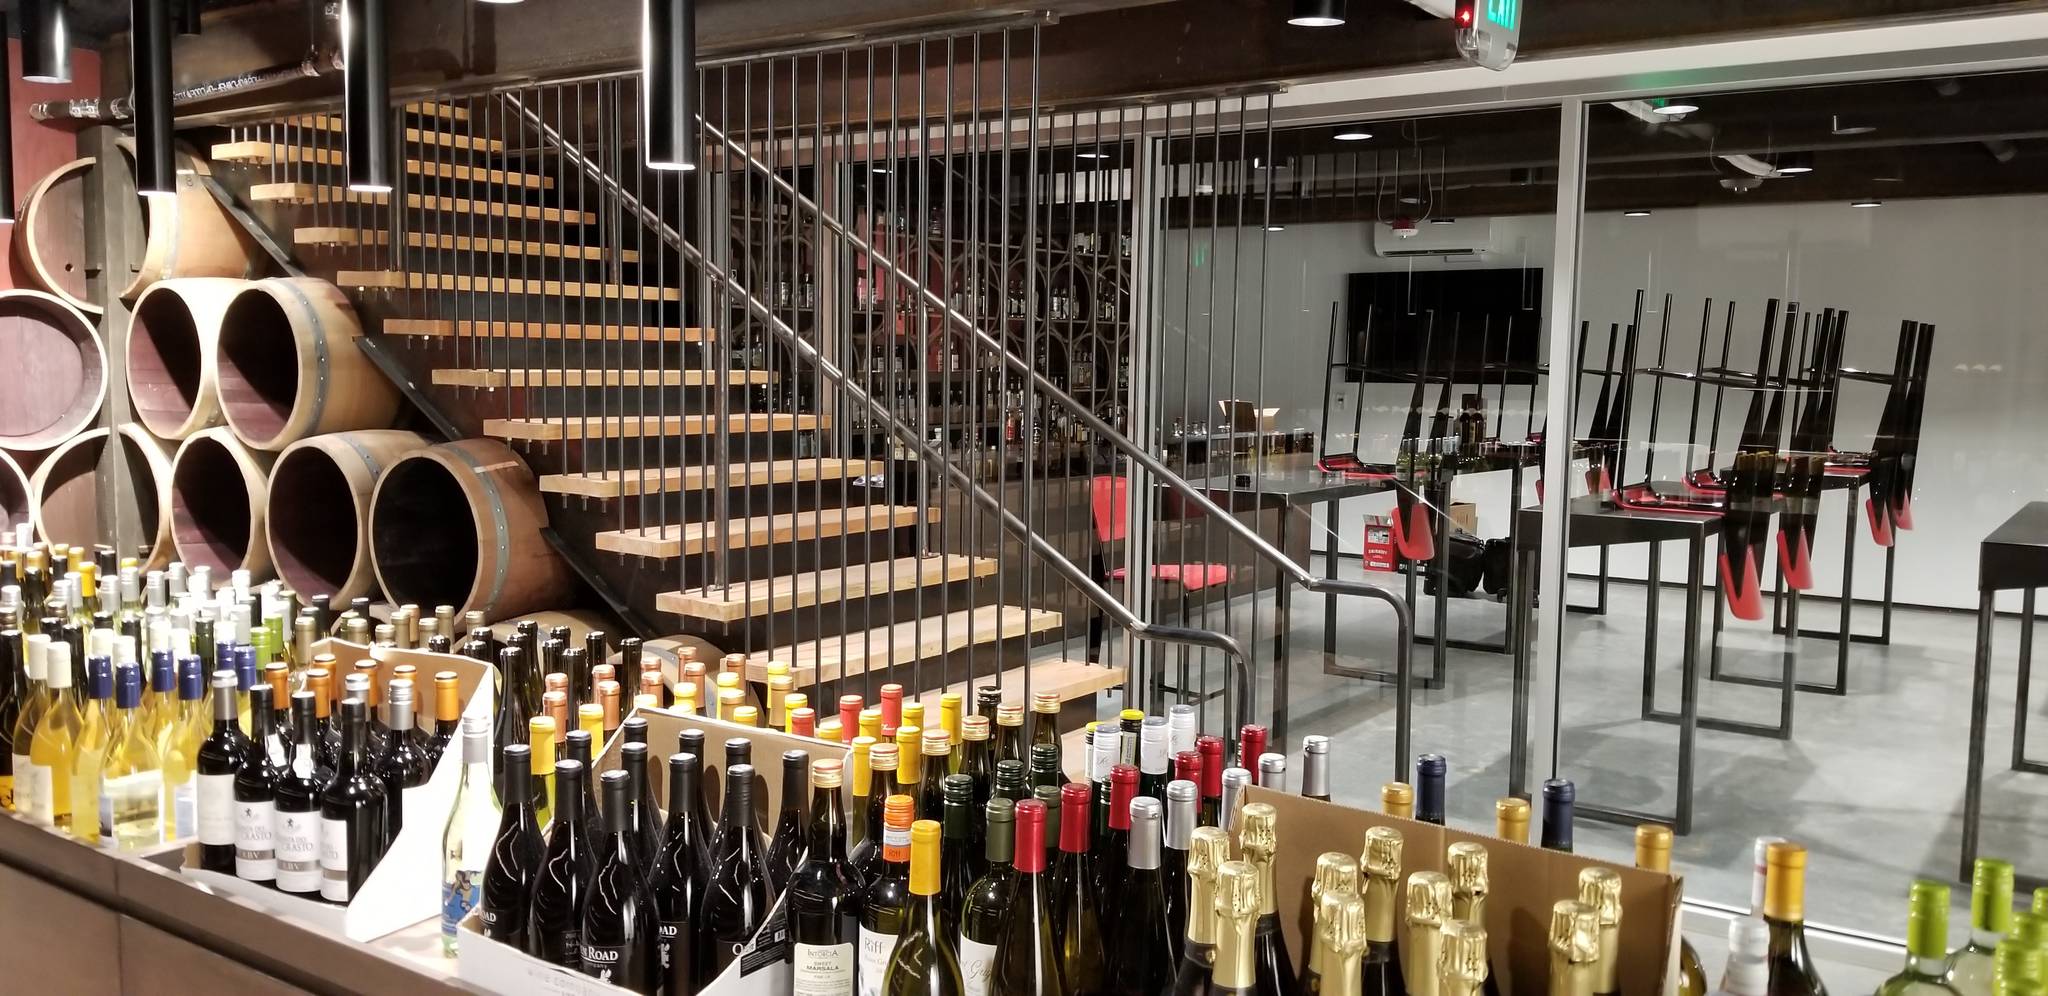 High Spirits new location in Poulsbo’s Century Building will boast a 3,000 square-foot wine cellar and a classroom which can double as an event space. Nick Twietmeyer | Kitsap News Group.